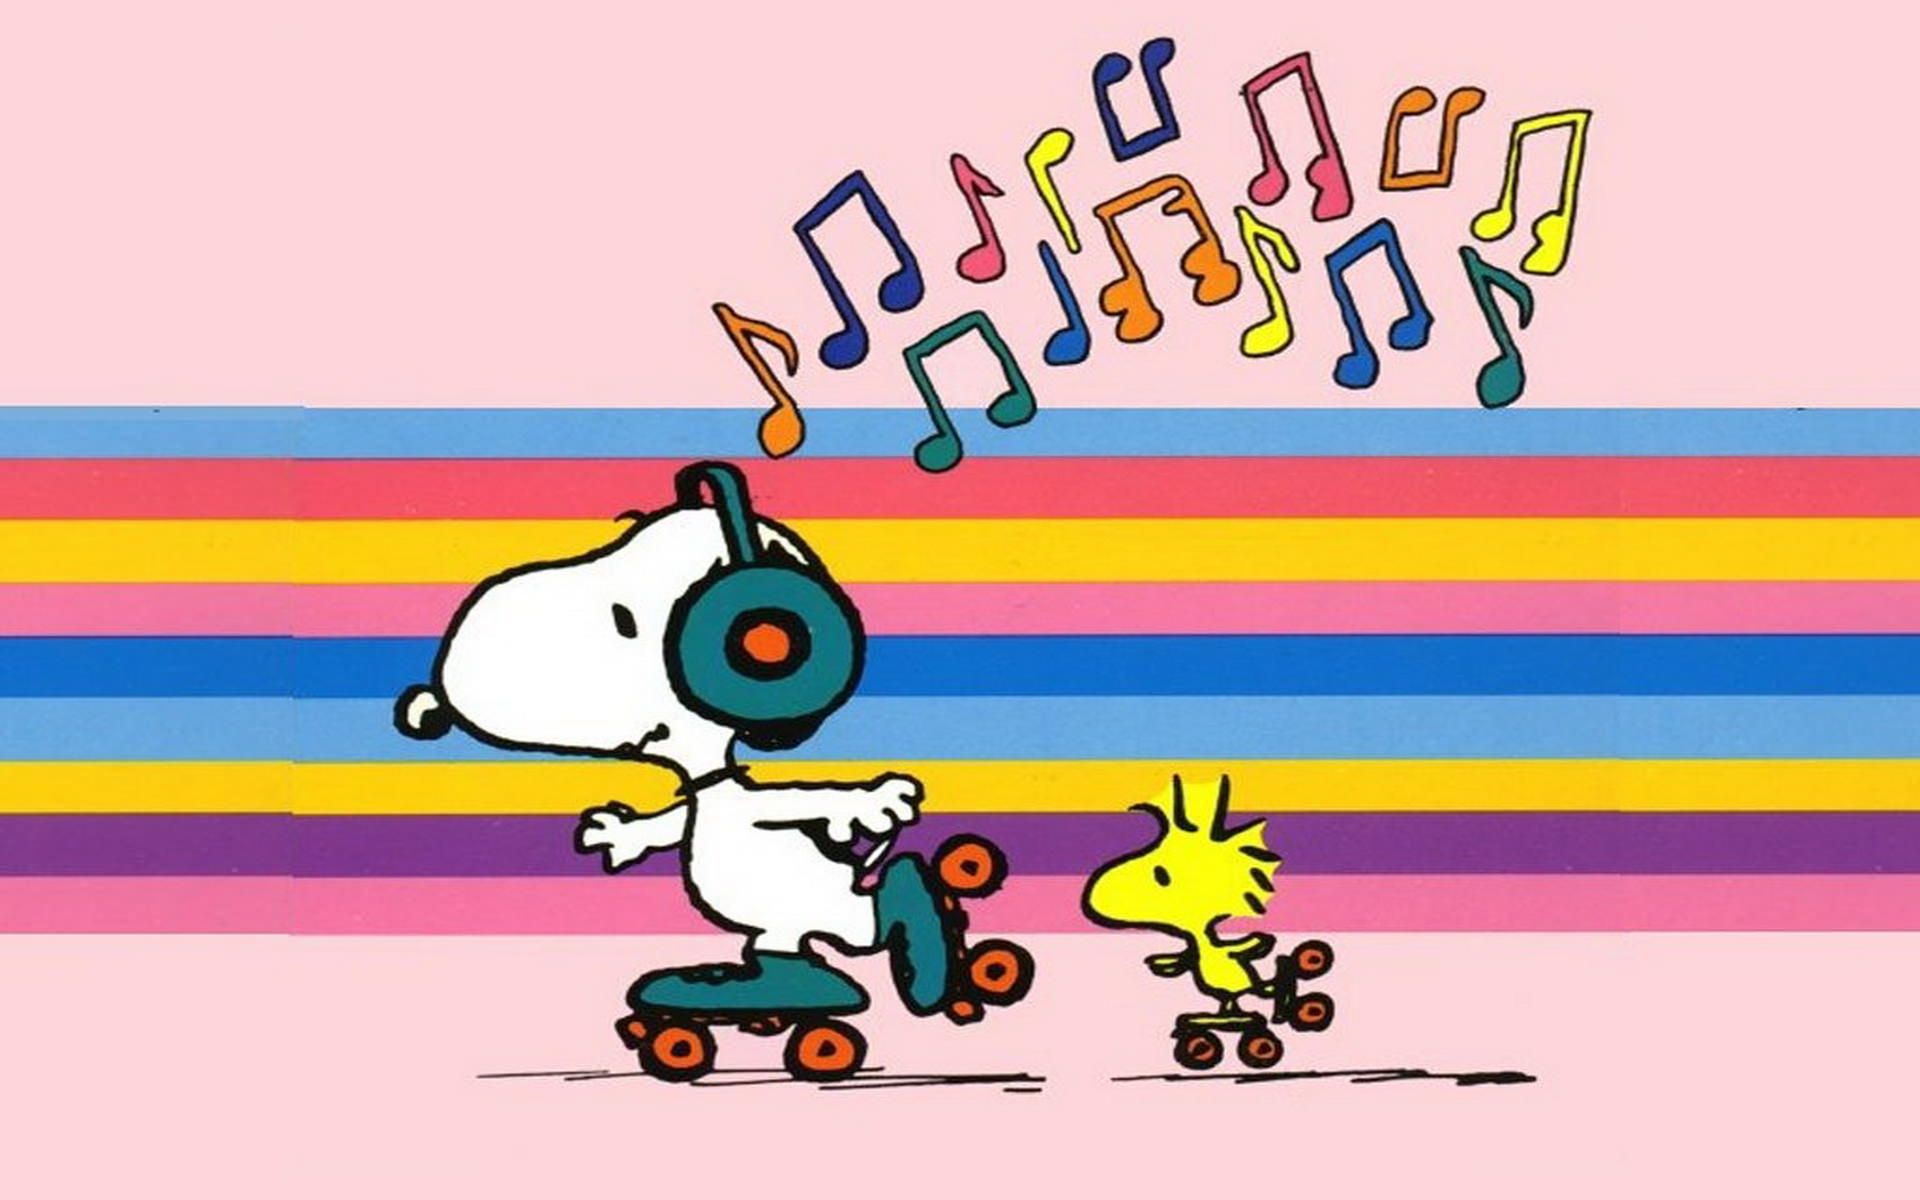 Charlie Brown and Snoopy roller skating on a rainbow background - Snoopy, Charlie Brown